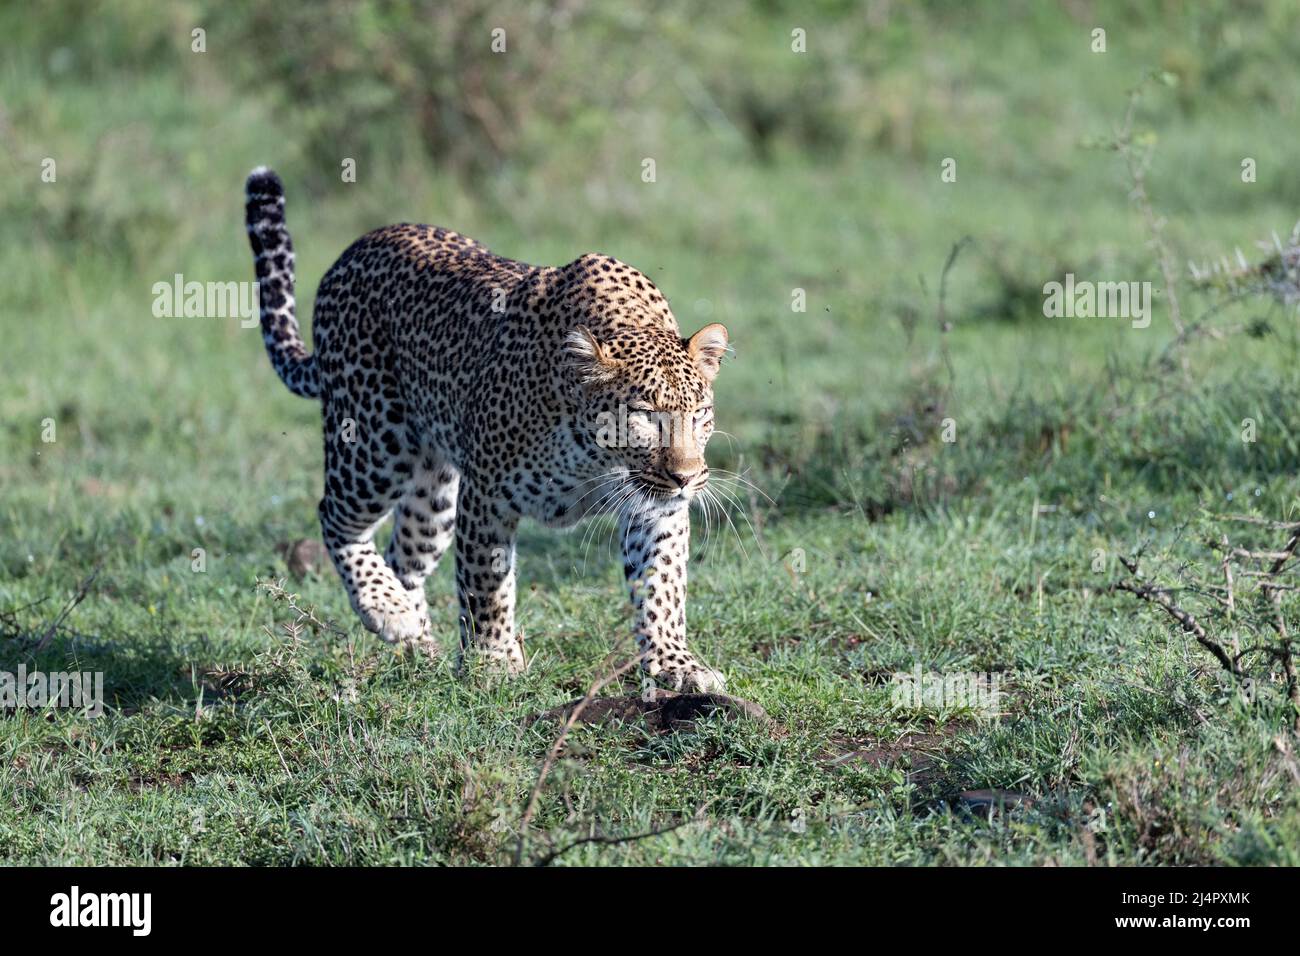 Prowling leopard in the savannah Stock Photo